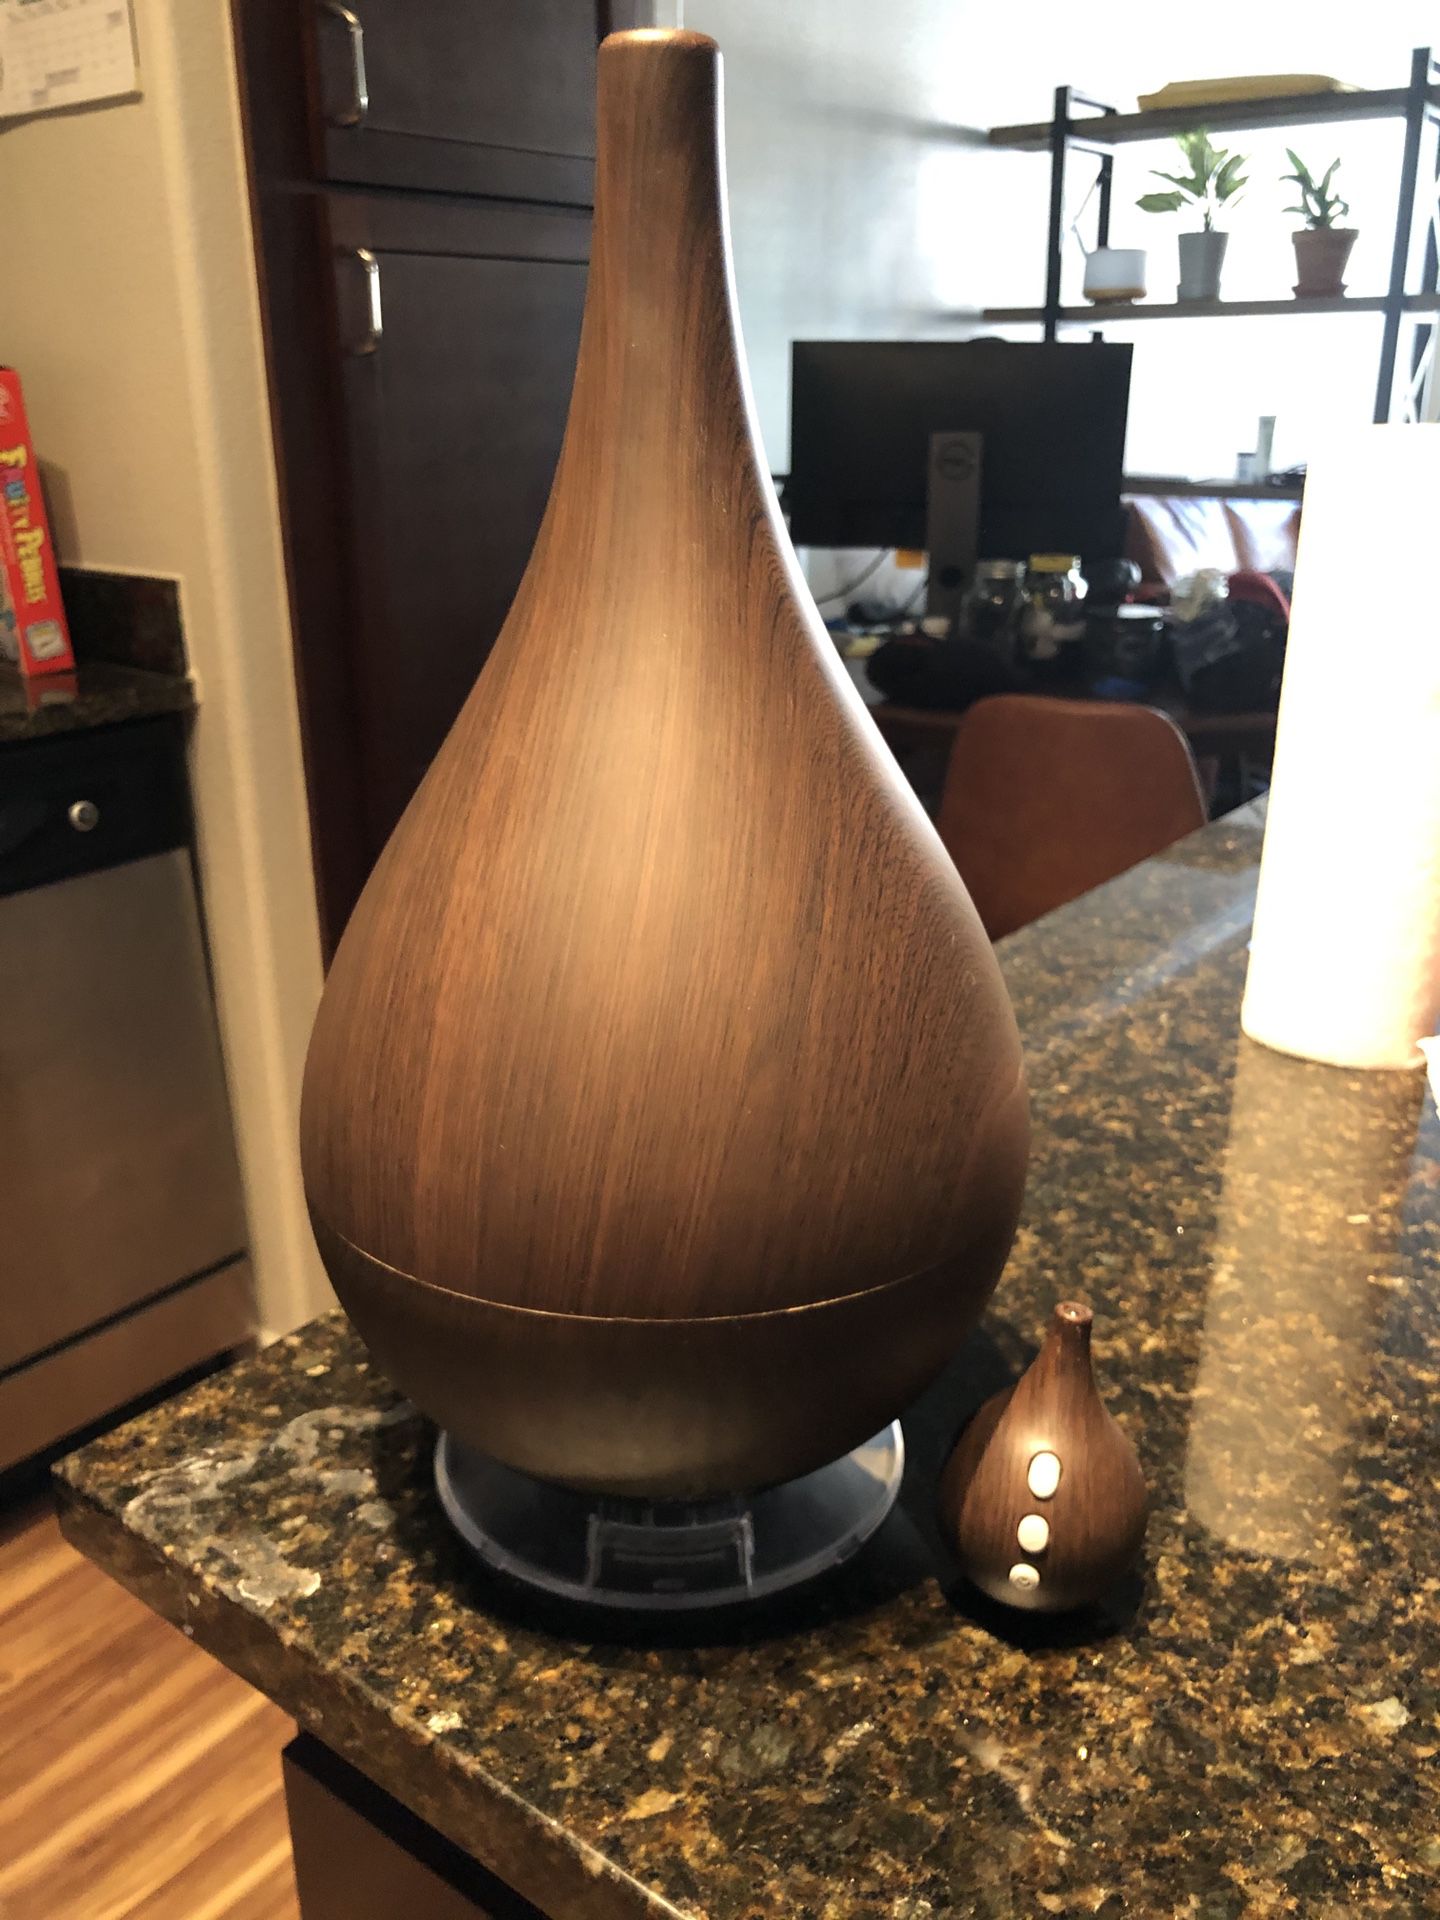 West Elm Humidifier